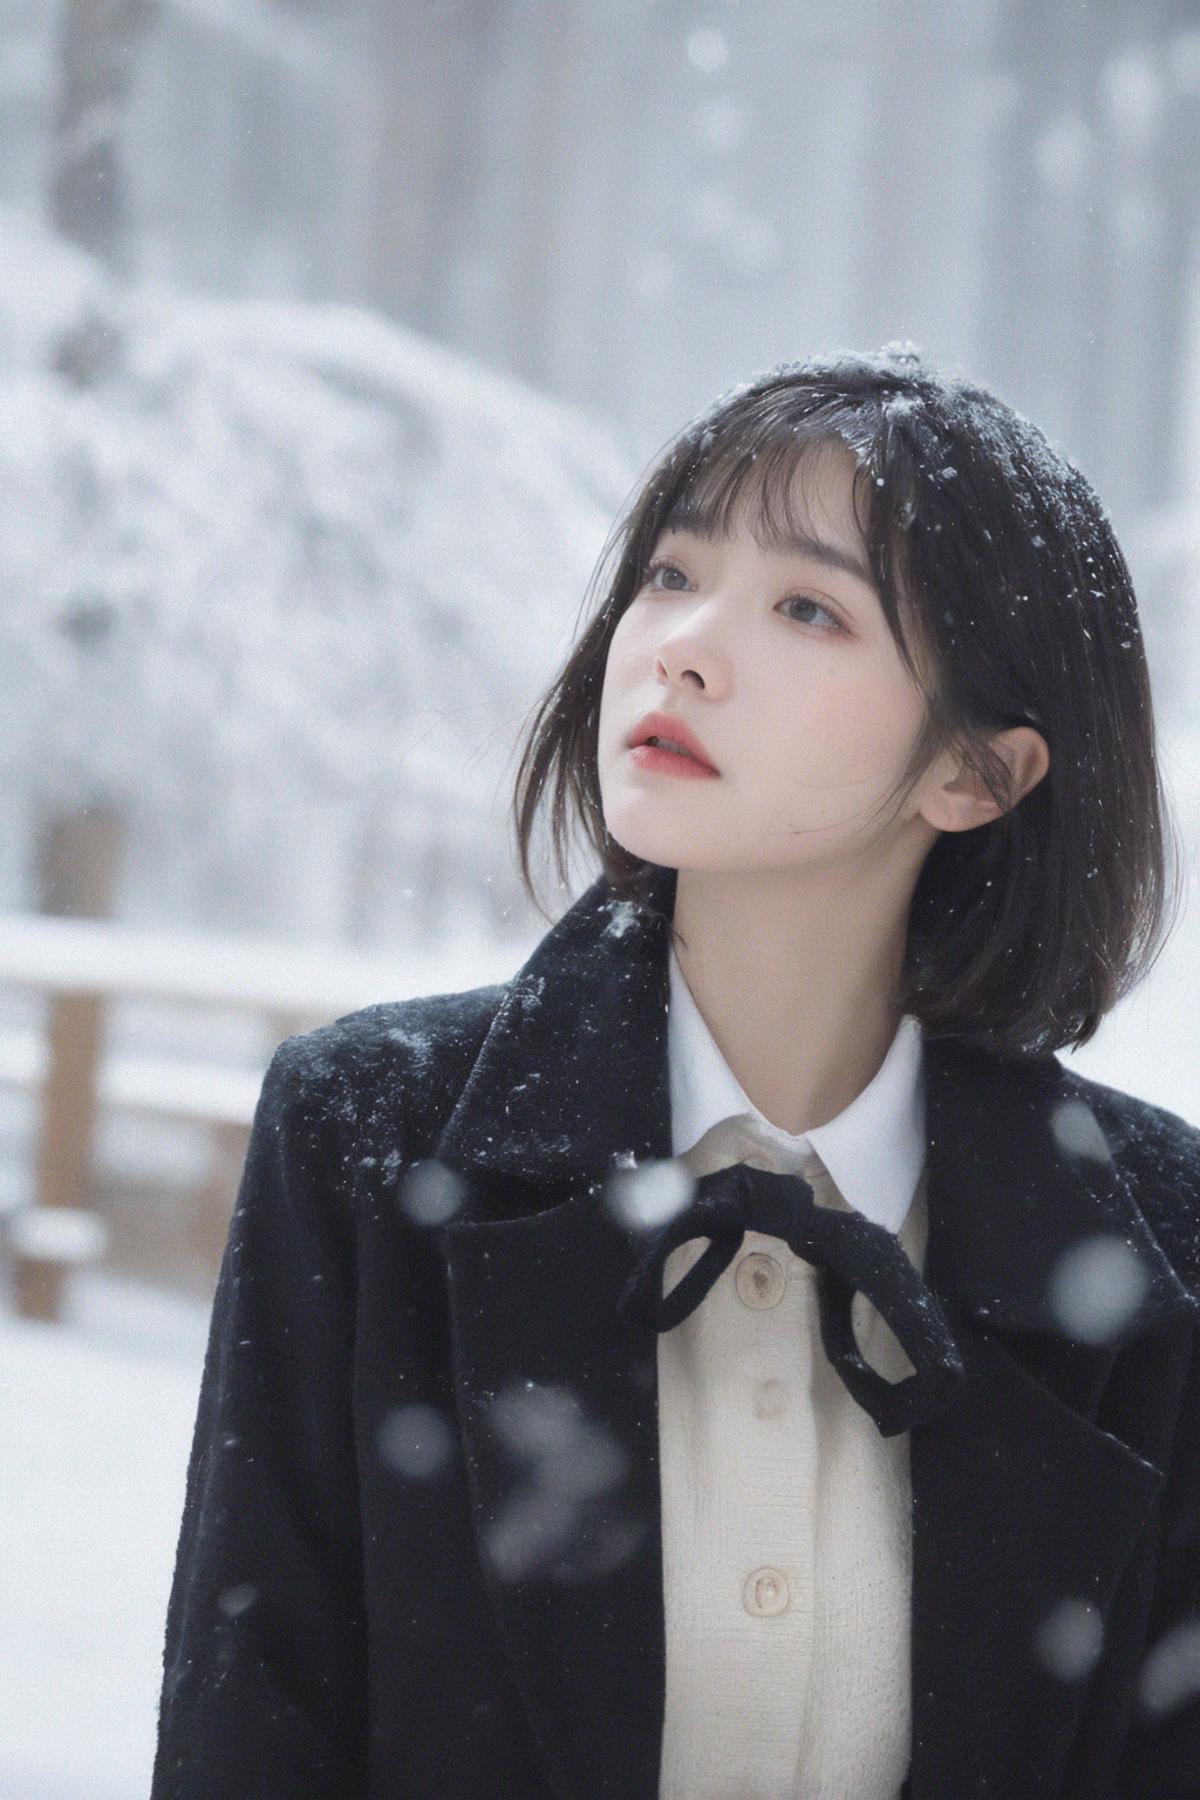 A young woman wearing a white shirt and black jacket, looking up and smiling as snow falls around her.